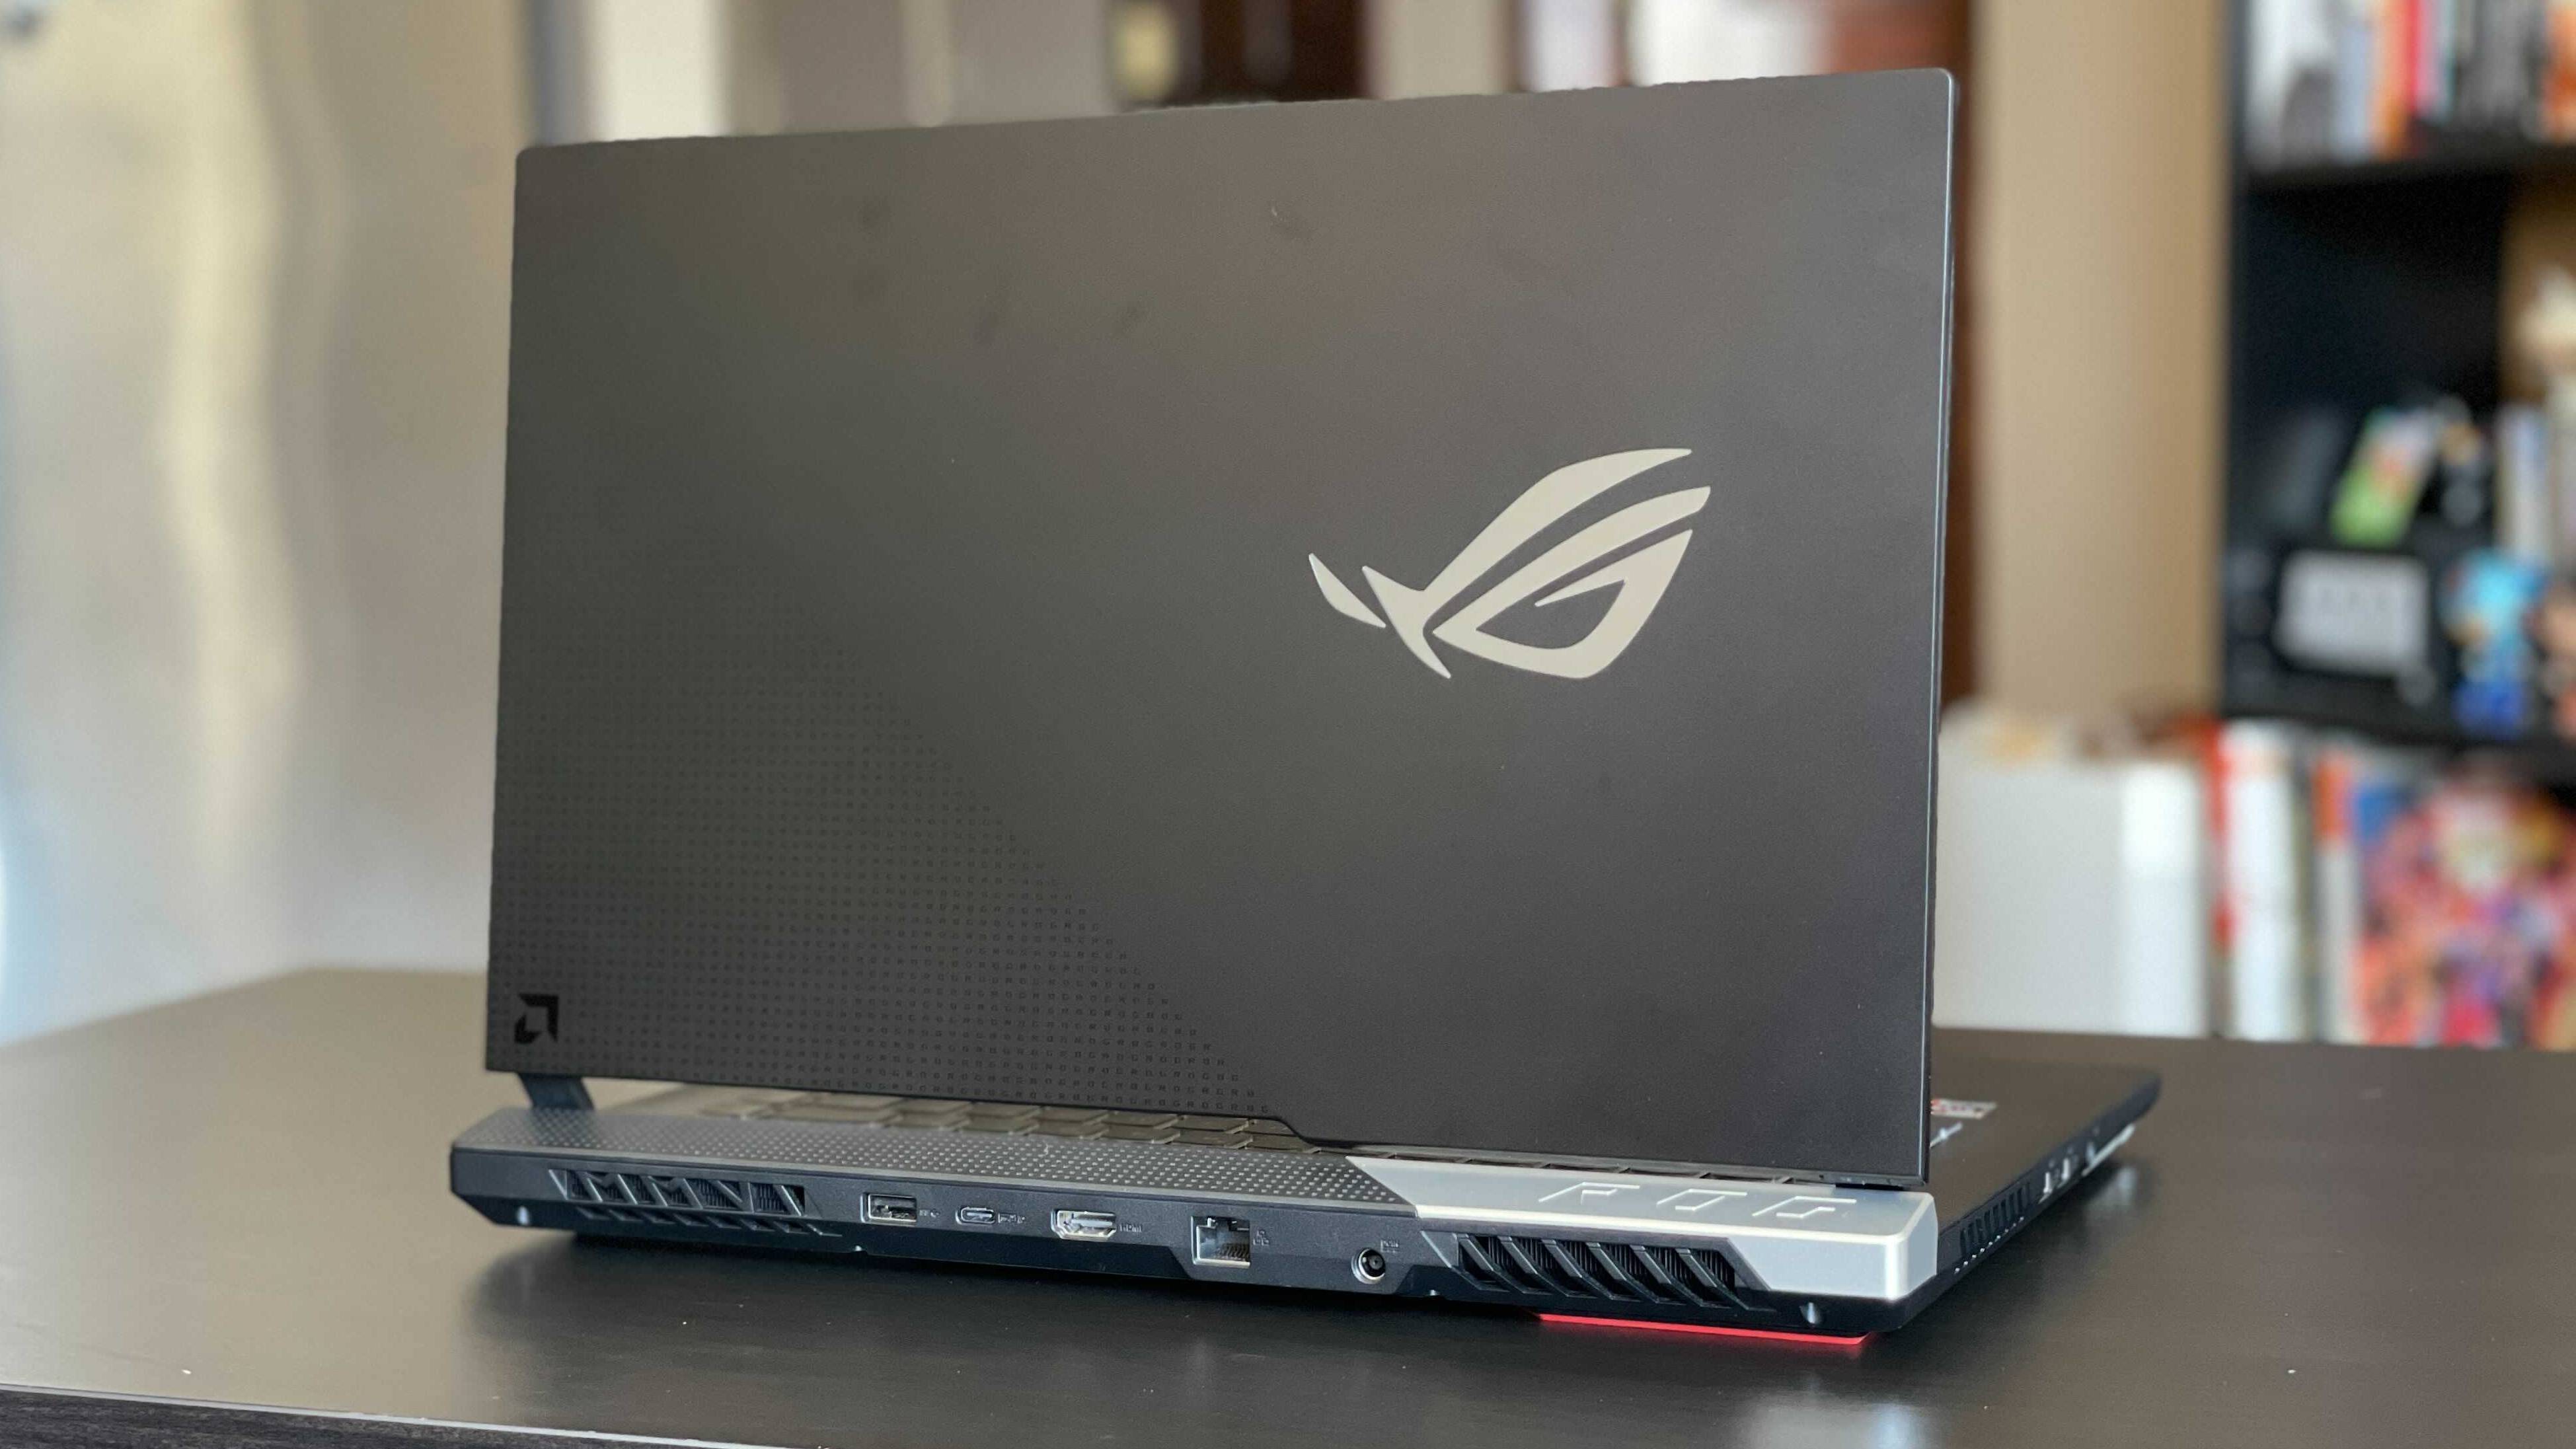 Best High-End Gaming Laptop Recommendations for 2022